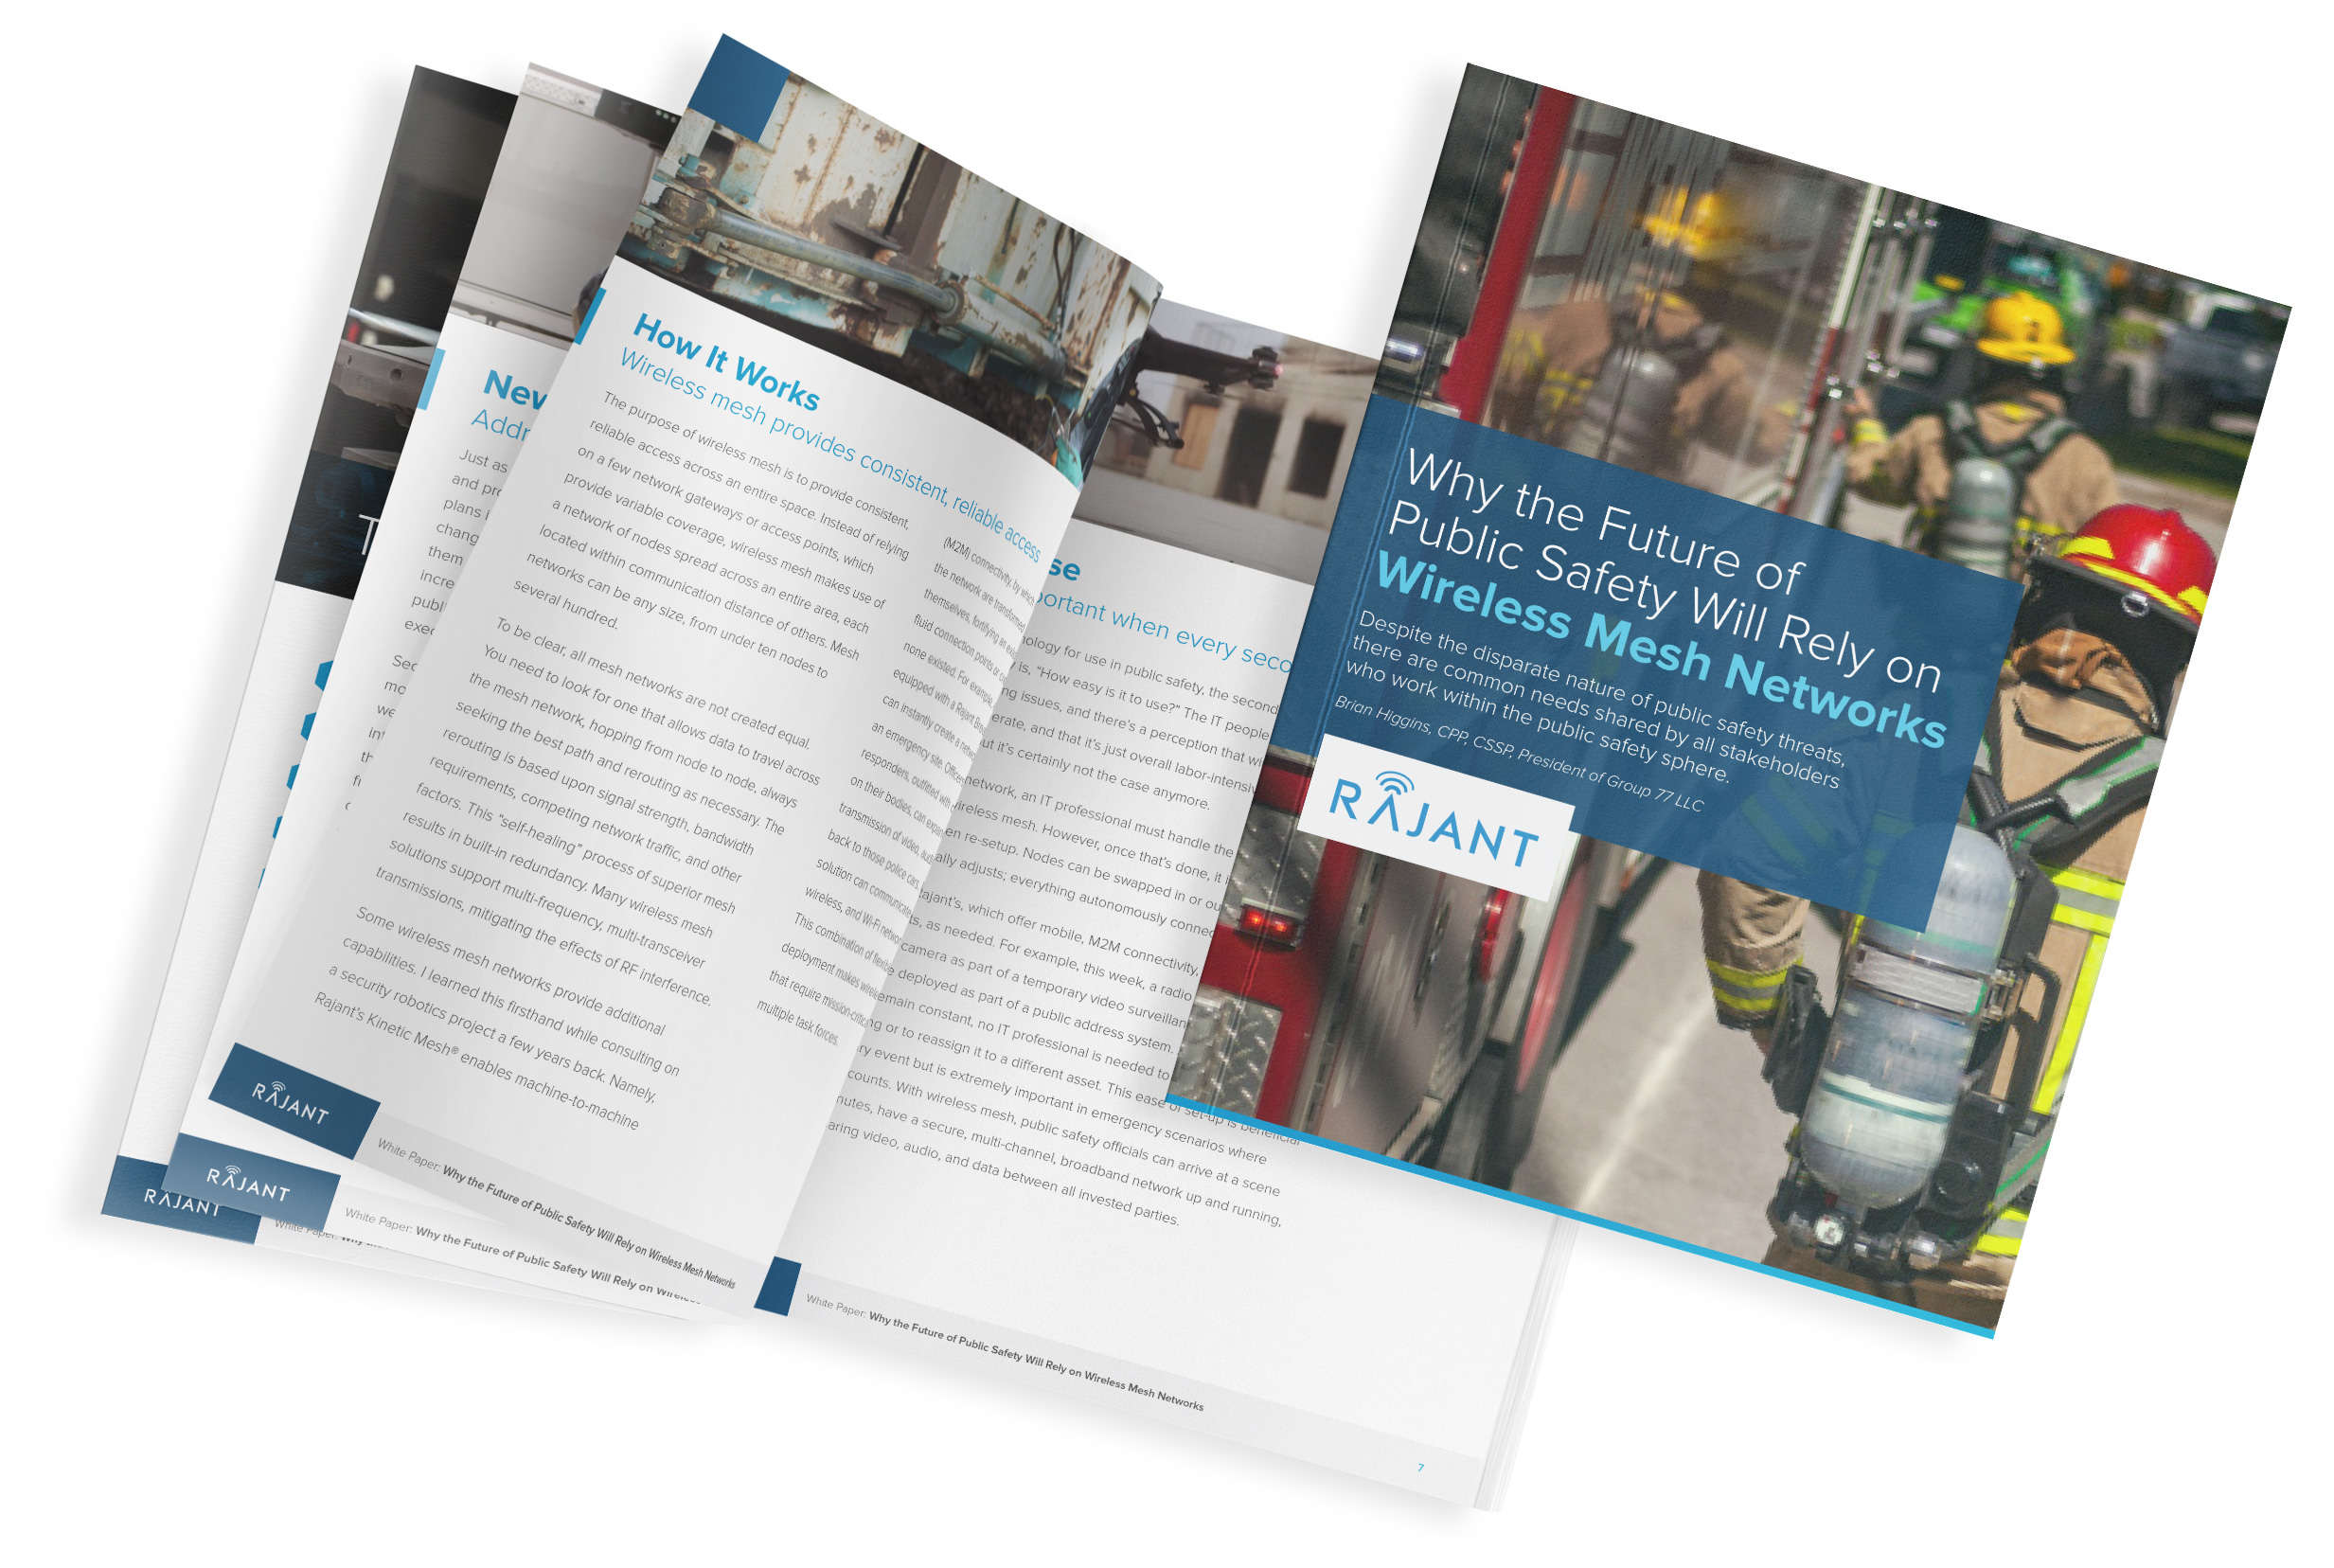 Whitepaper Future of Public Safety